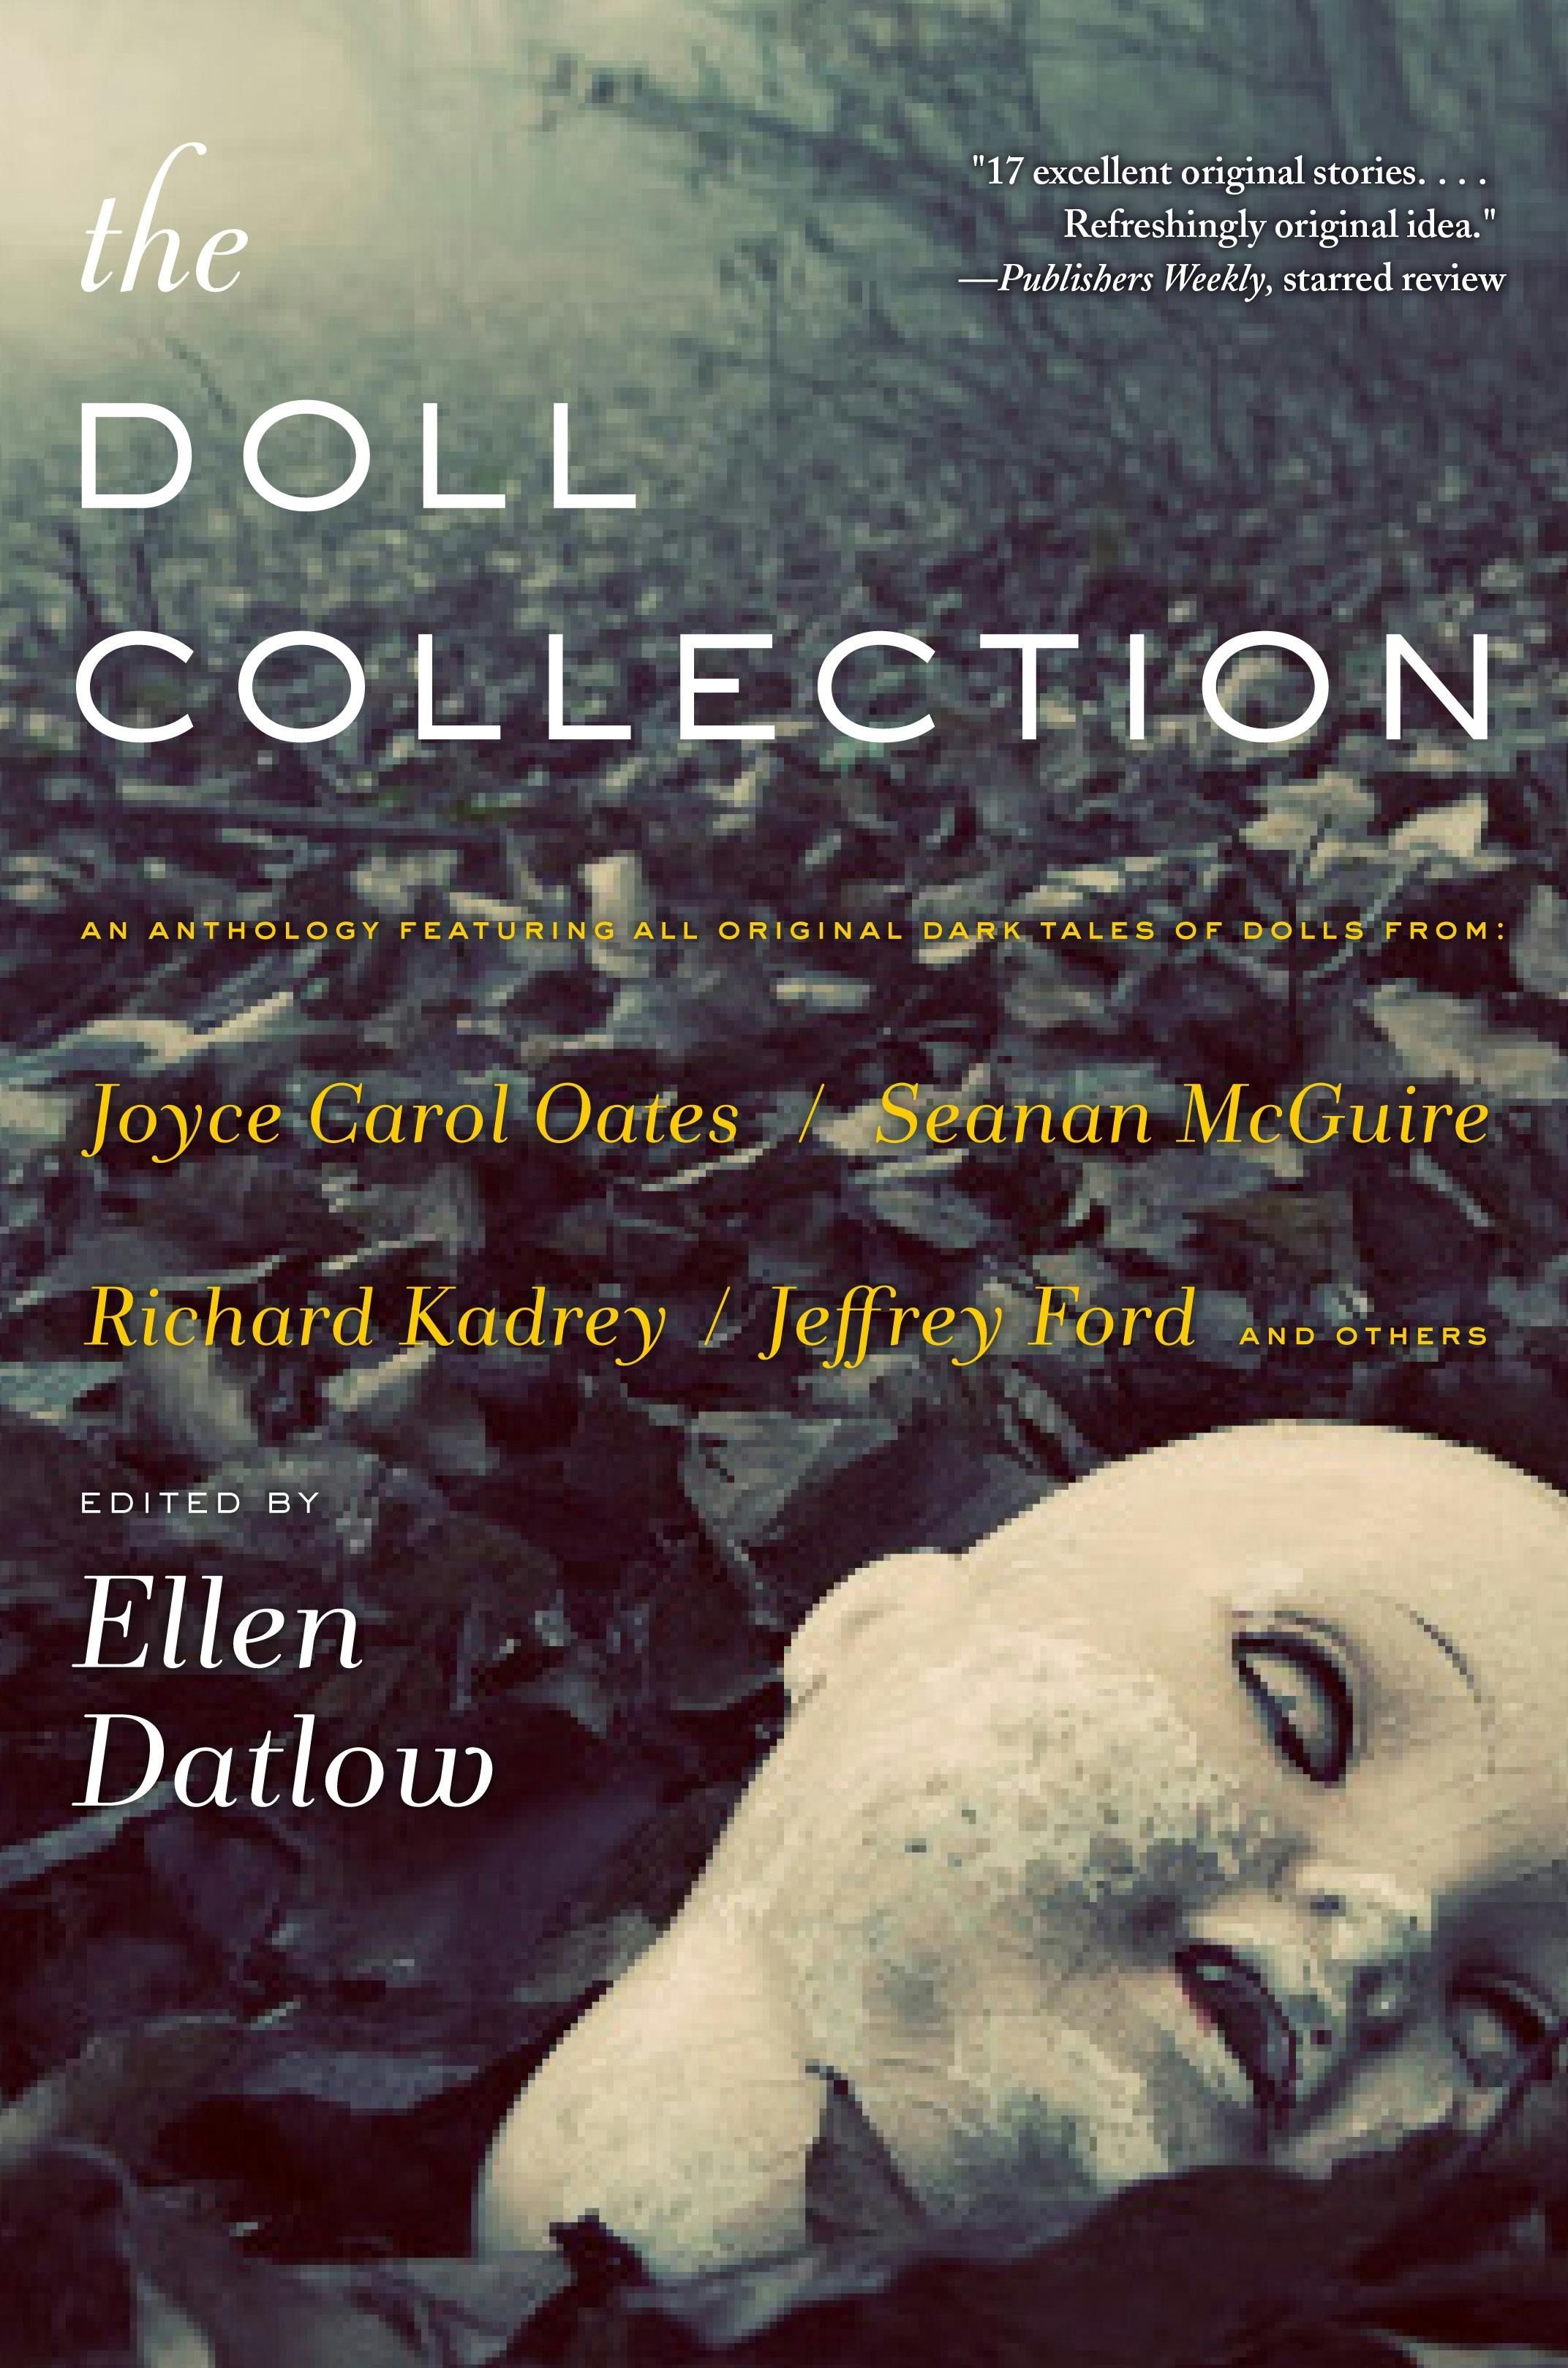 Cover for the book titled as: The Doll Collection